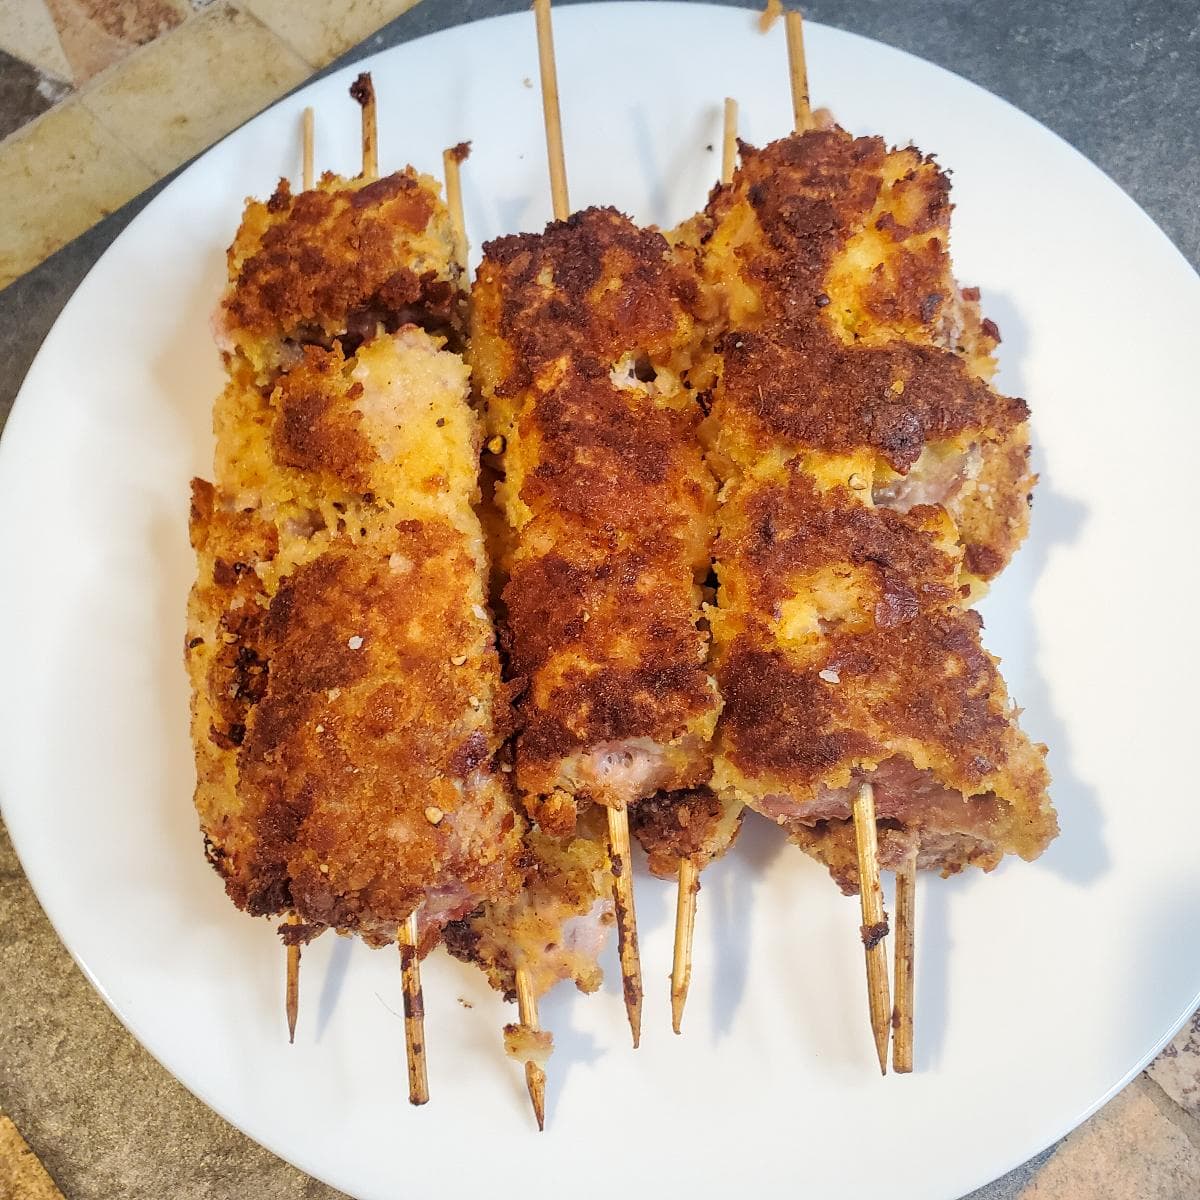 City Chicken recipe from cleveland cooking. Breaded pork cooked on skewers